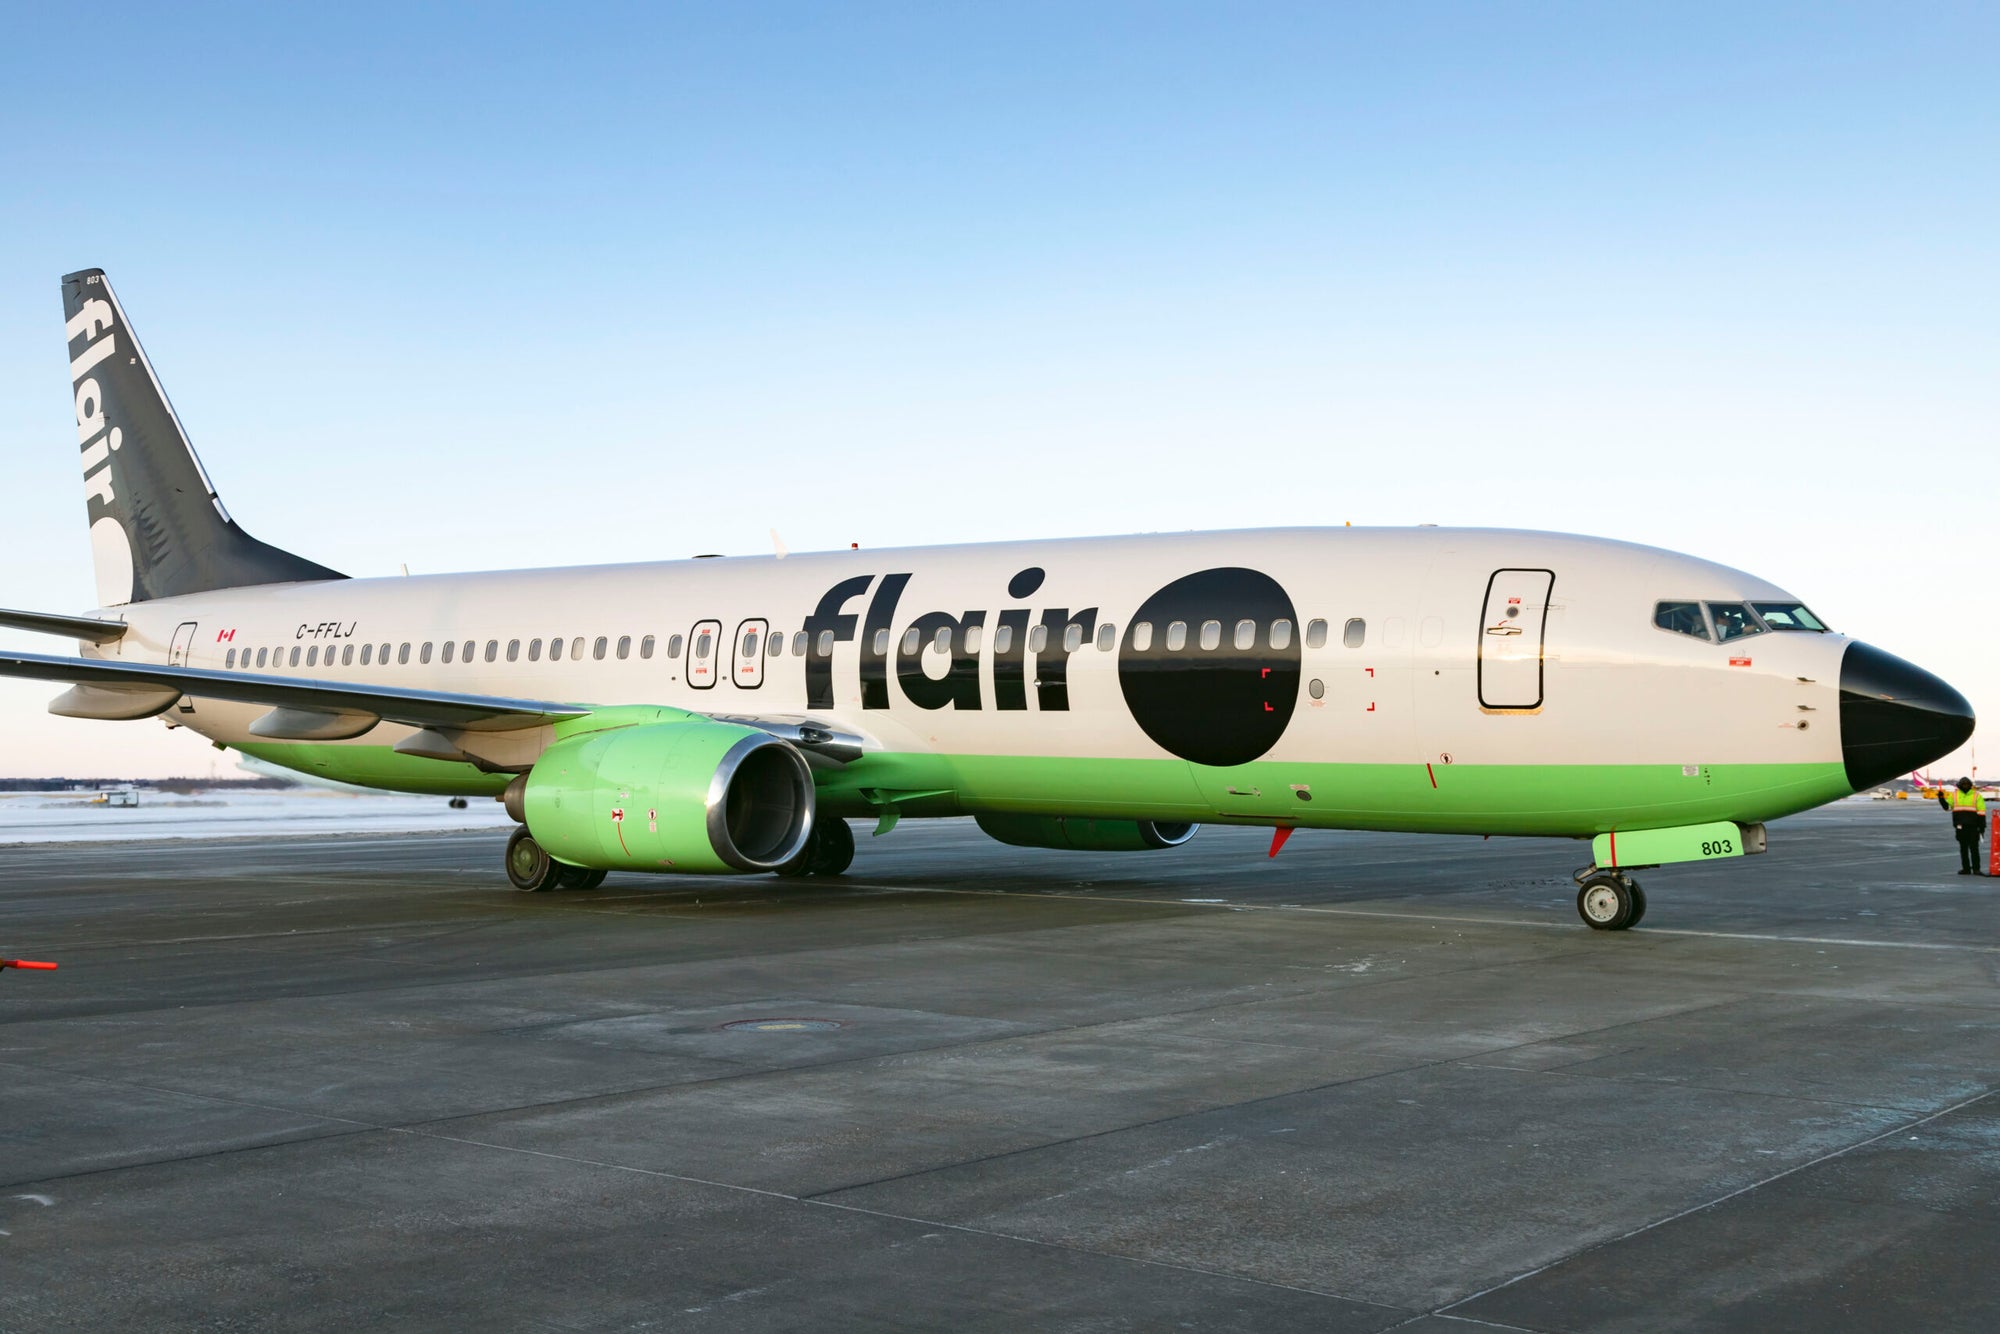 THE GUMMY PROJECT SELECTED TO BE SUPPLIER OF GUMMY PRODUCTS FOR FLAIR AIRLINES WITH NEW PARTNERSHIP